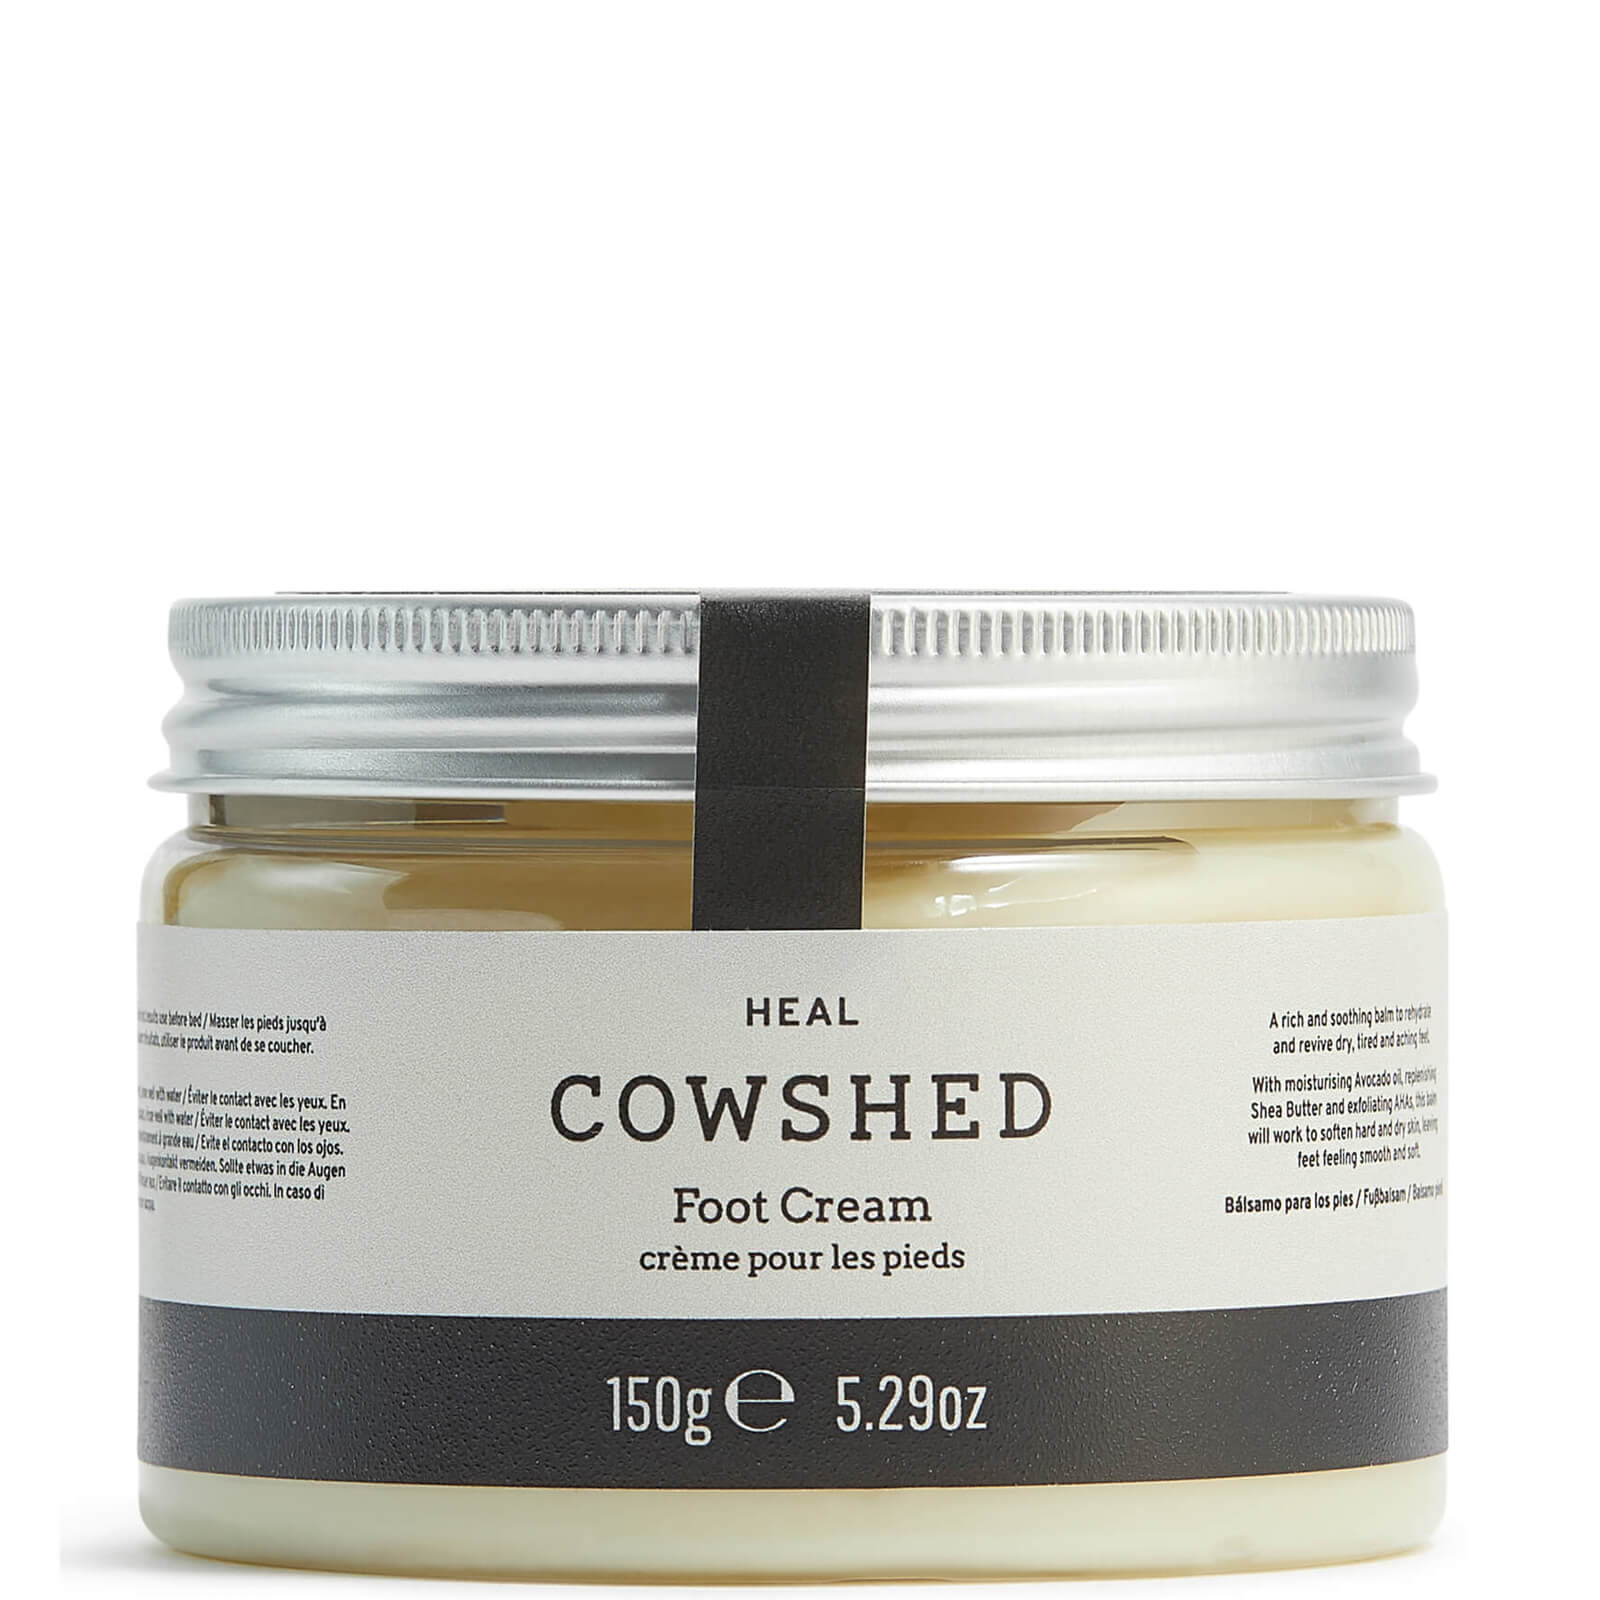 COWSHED HEAL FOOT CREAM 150G